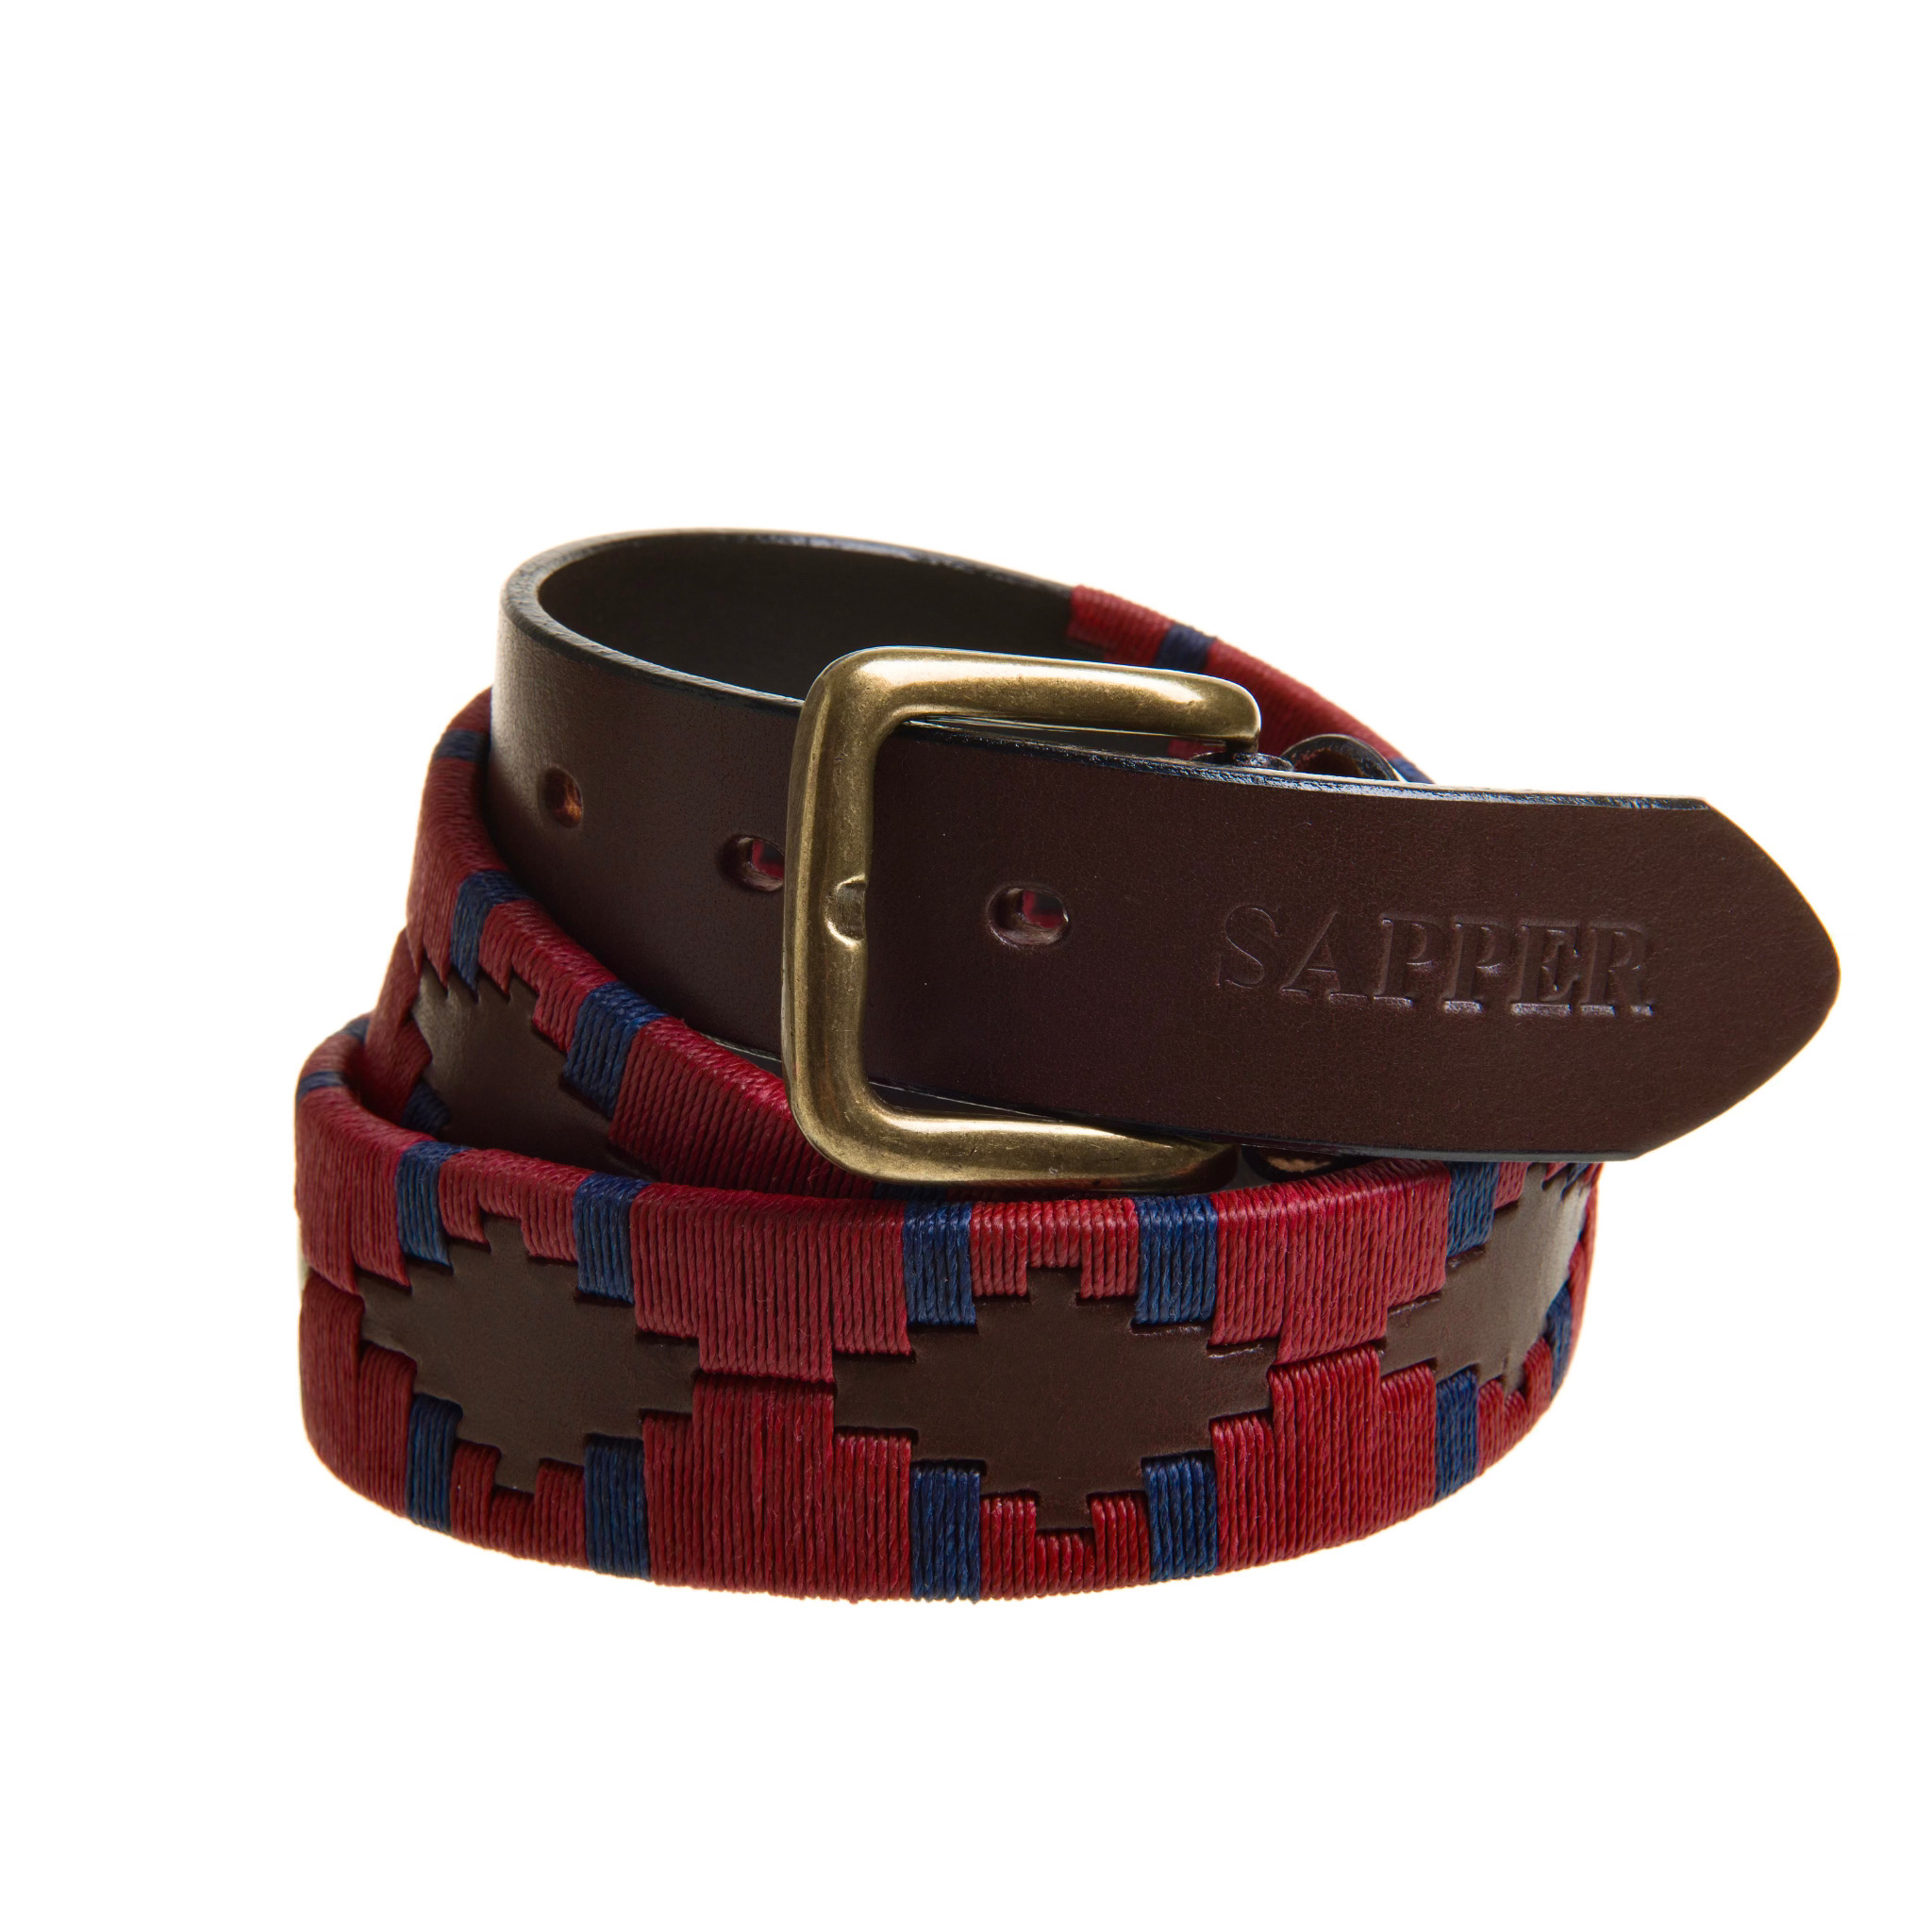 The Country Direct & Pampeano Royal Engineers Leather Polo Belt (Sapper).